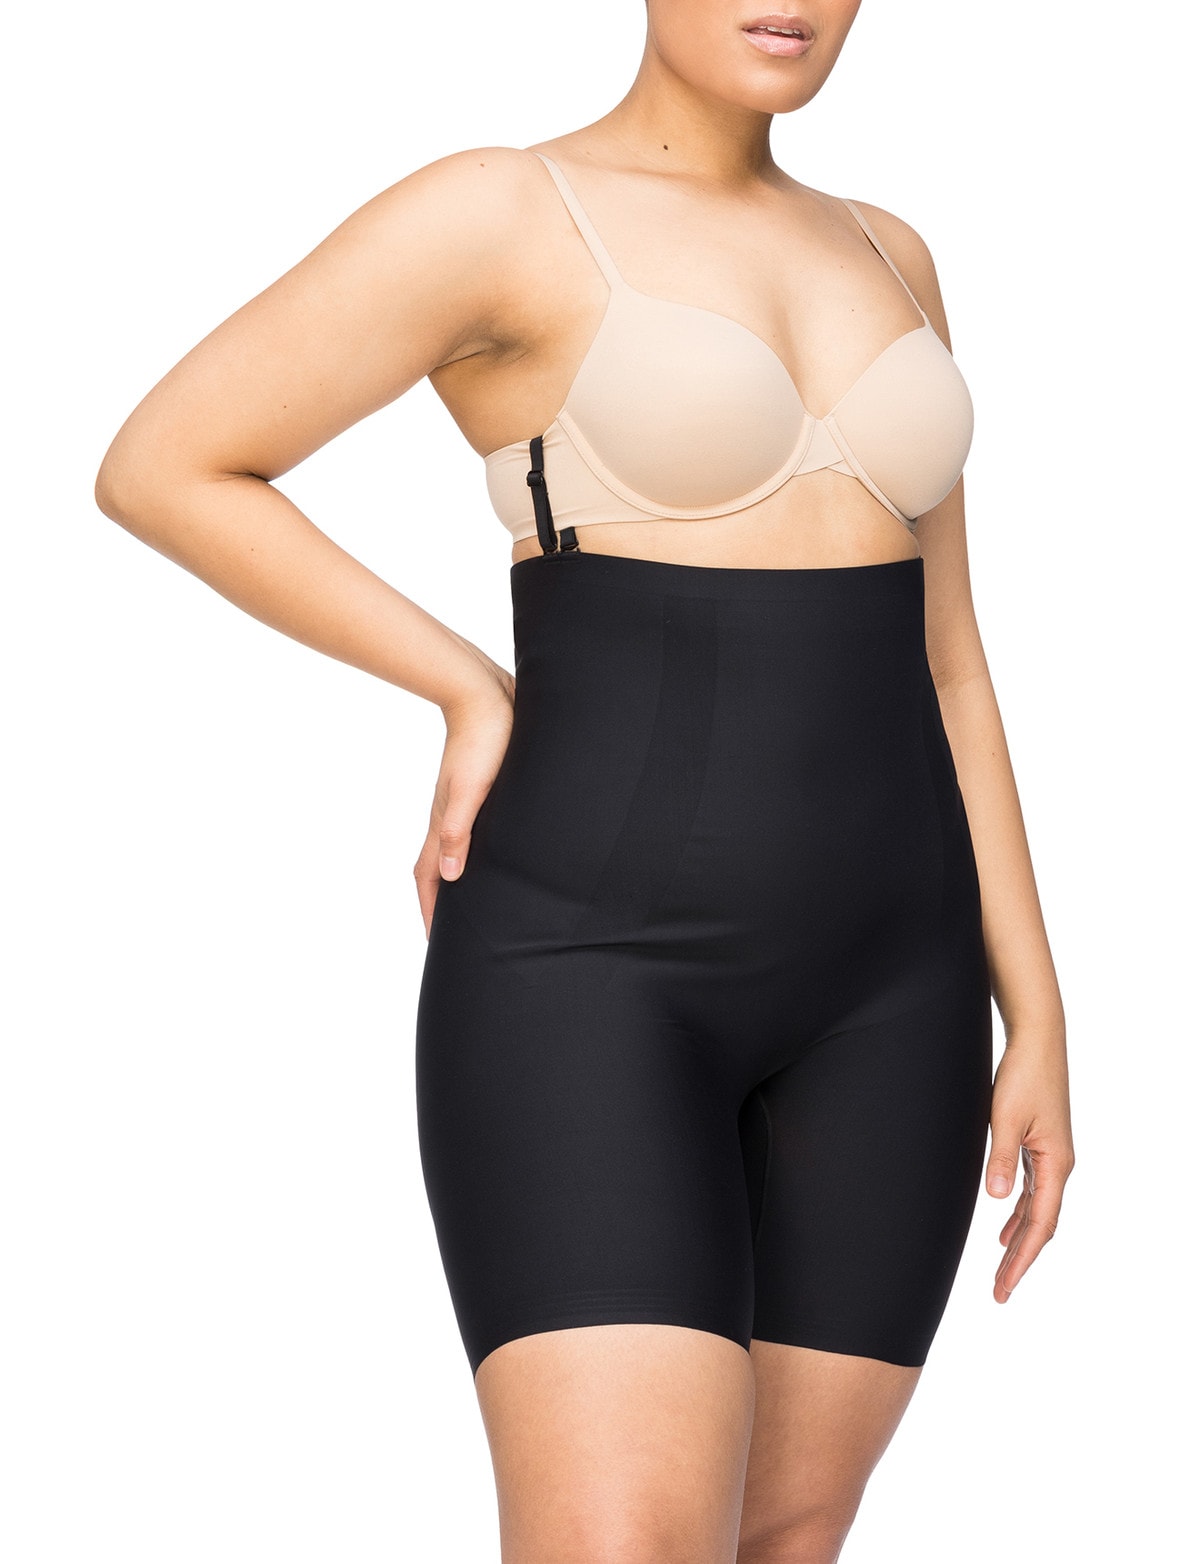 Plus Size Body Shapers : Target